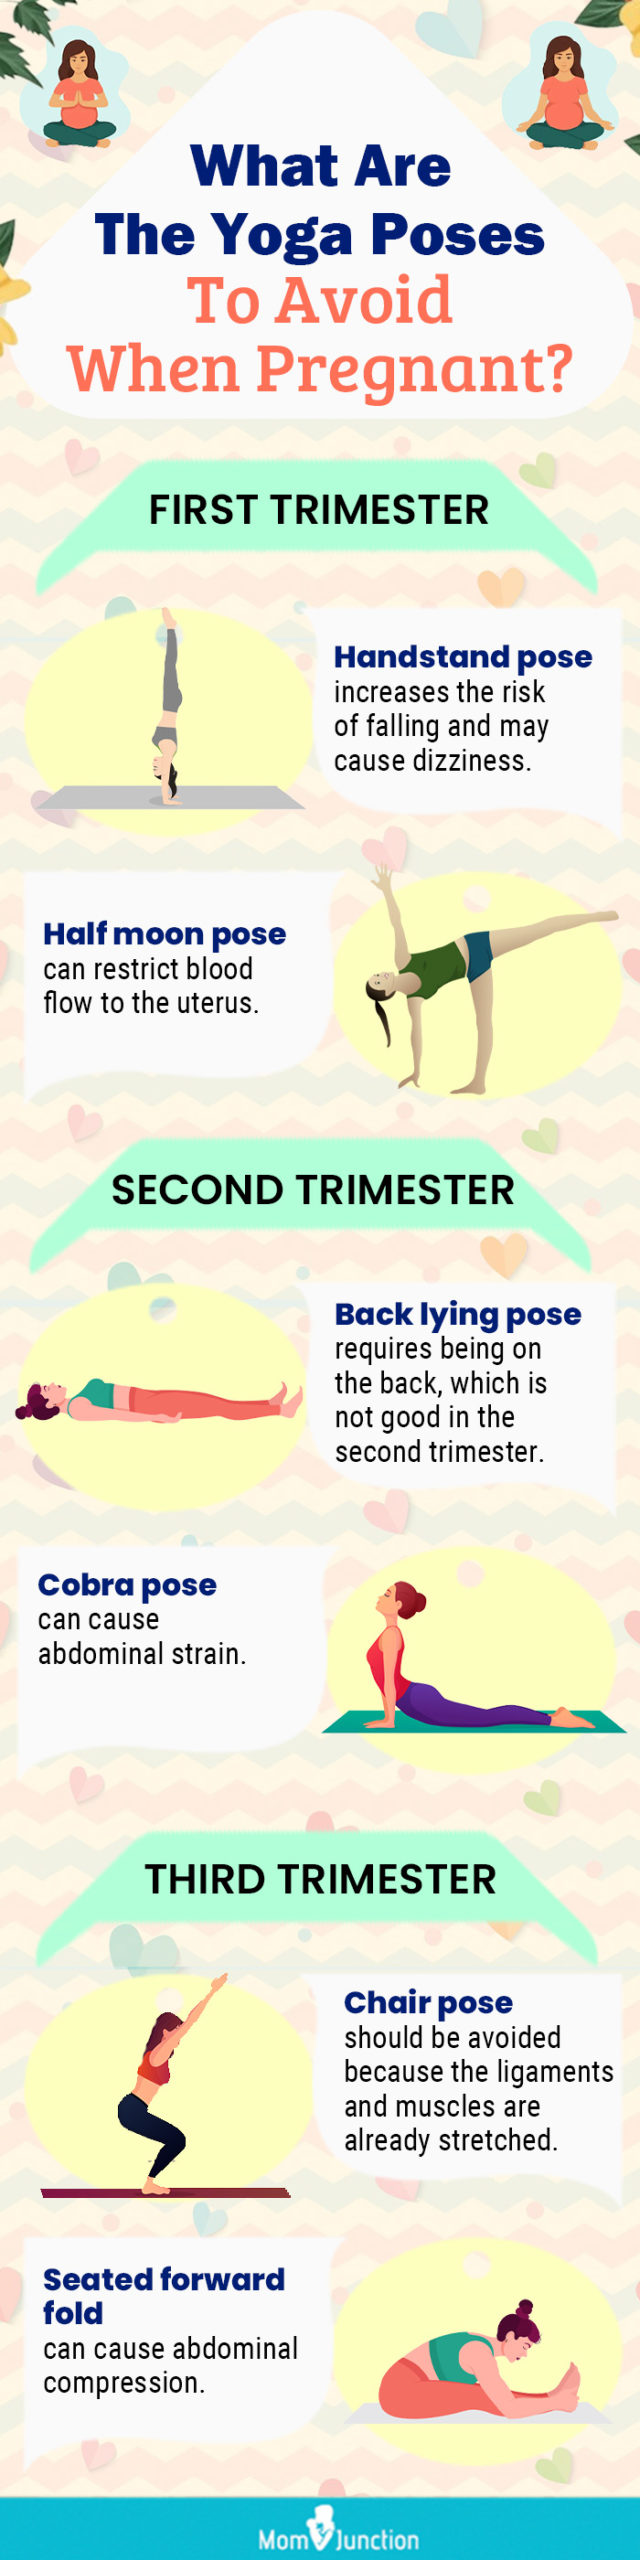 what are the yoga poses to avoid when pregnant (infographic)